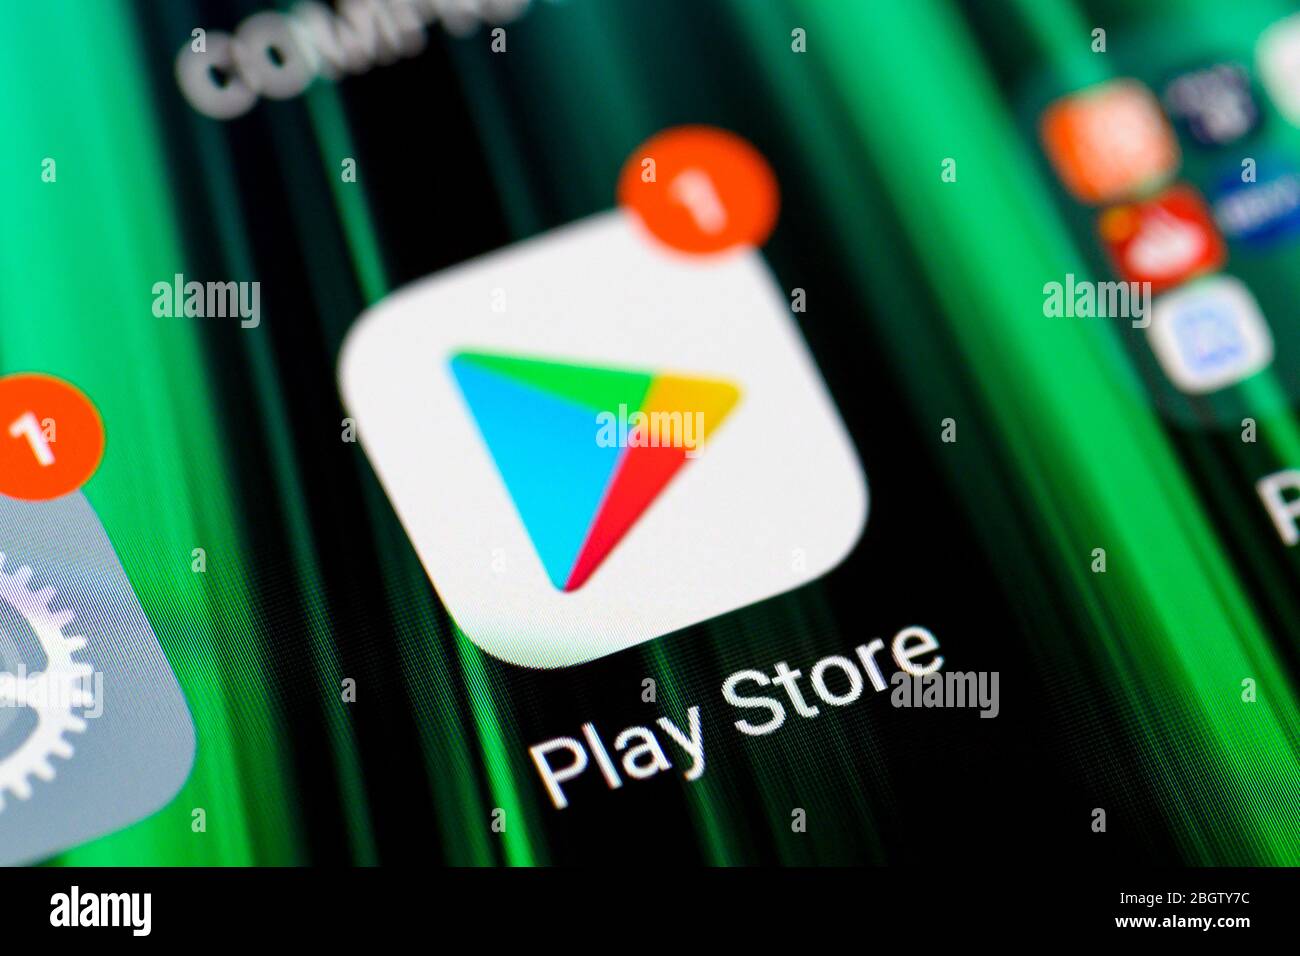 Burgos, Spain - April 13, 2020: Play store application icon on smartphone screen. Mobile application icon of play store. Google Play Store .  Stock Photo